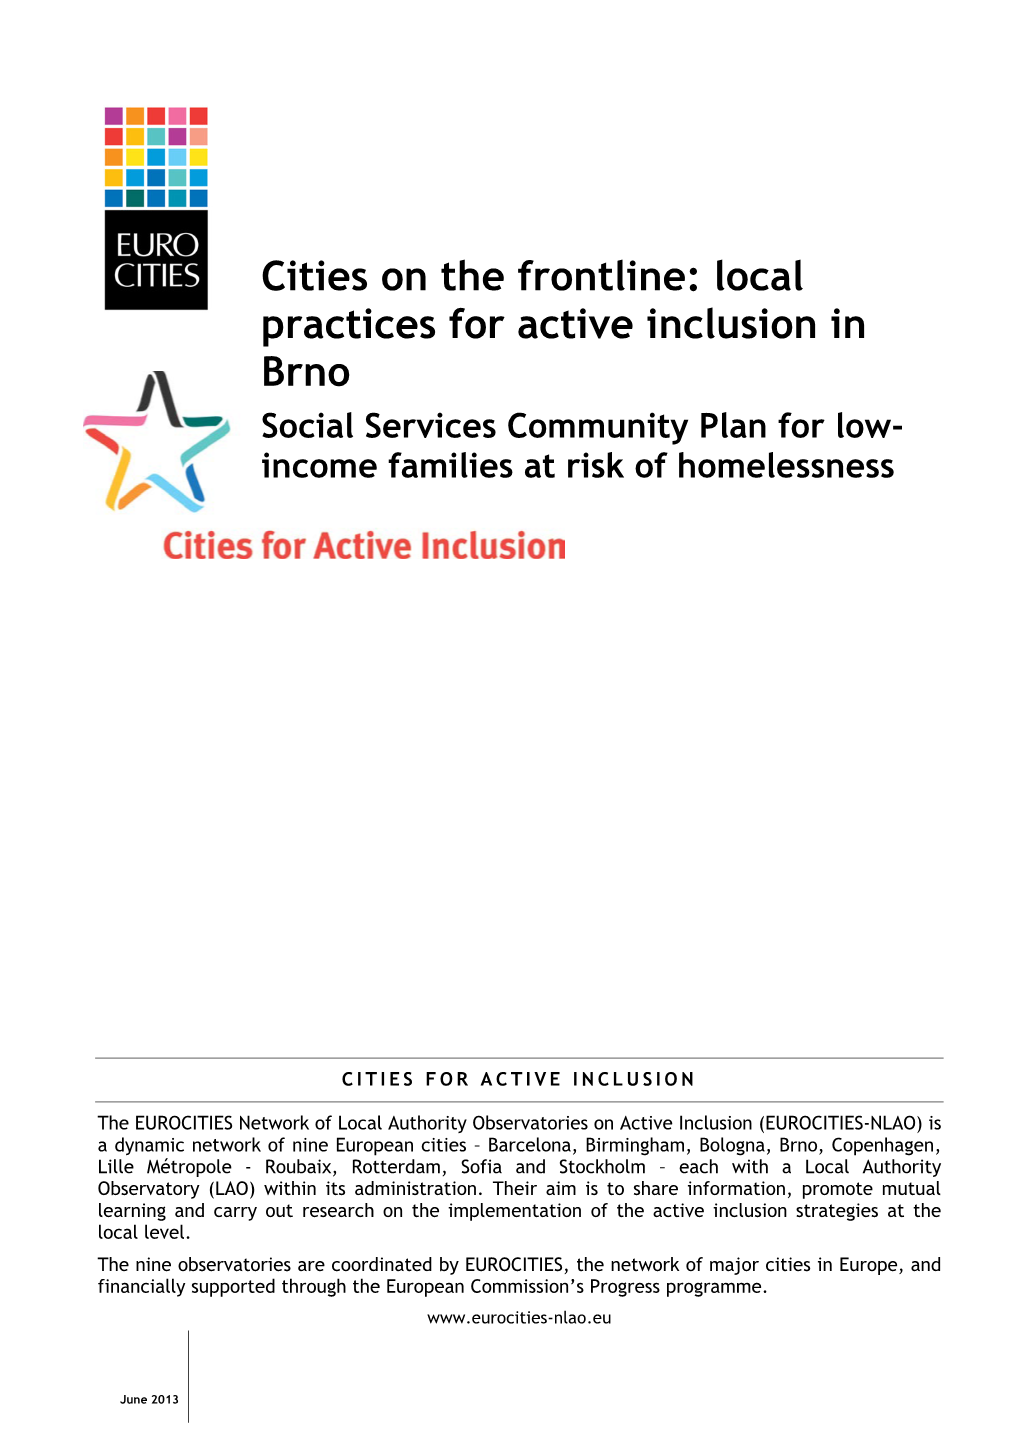 Cities on the Frontline: Local Practices for Active Inclusion in Brno Social Services Community Plan for Low- Income Families at Risk of Homelessness